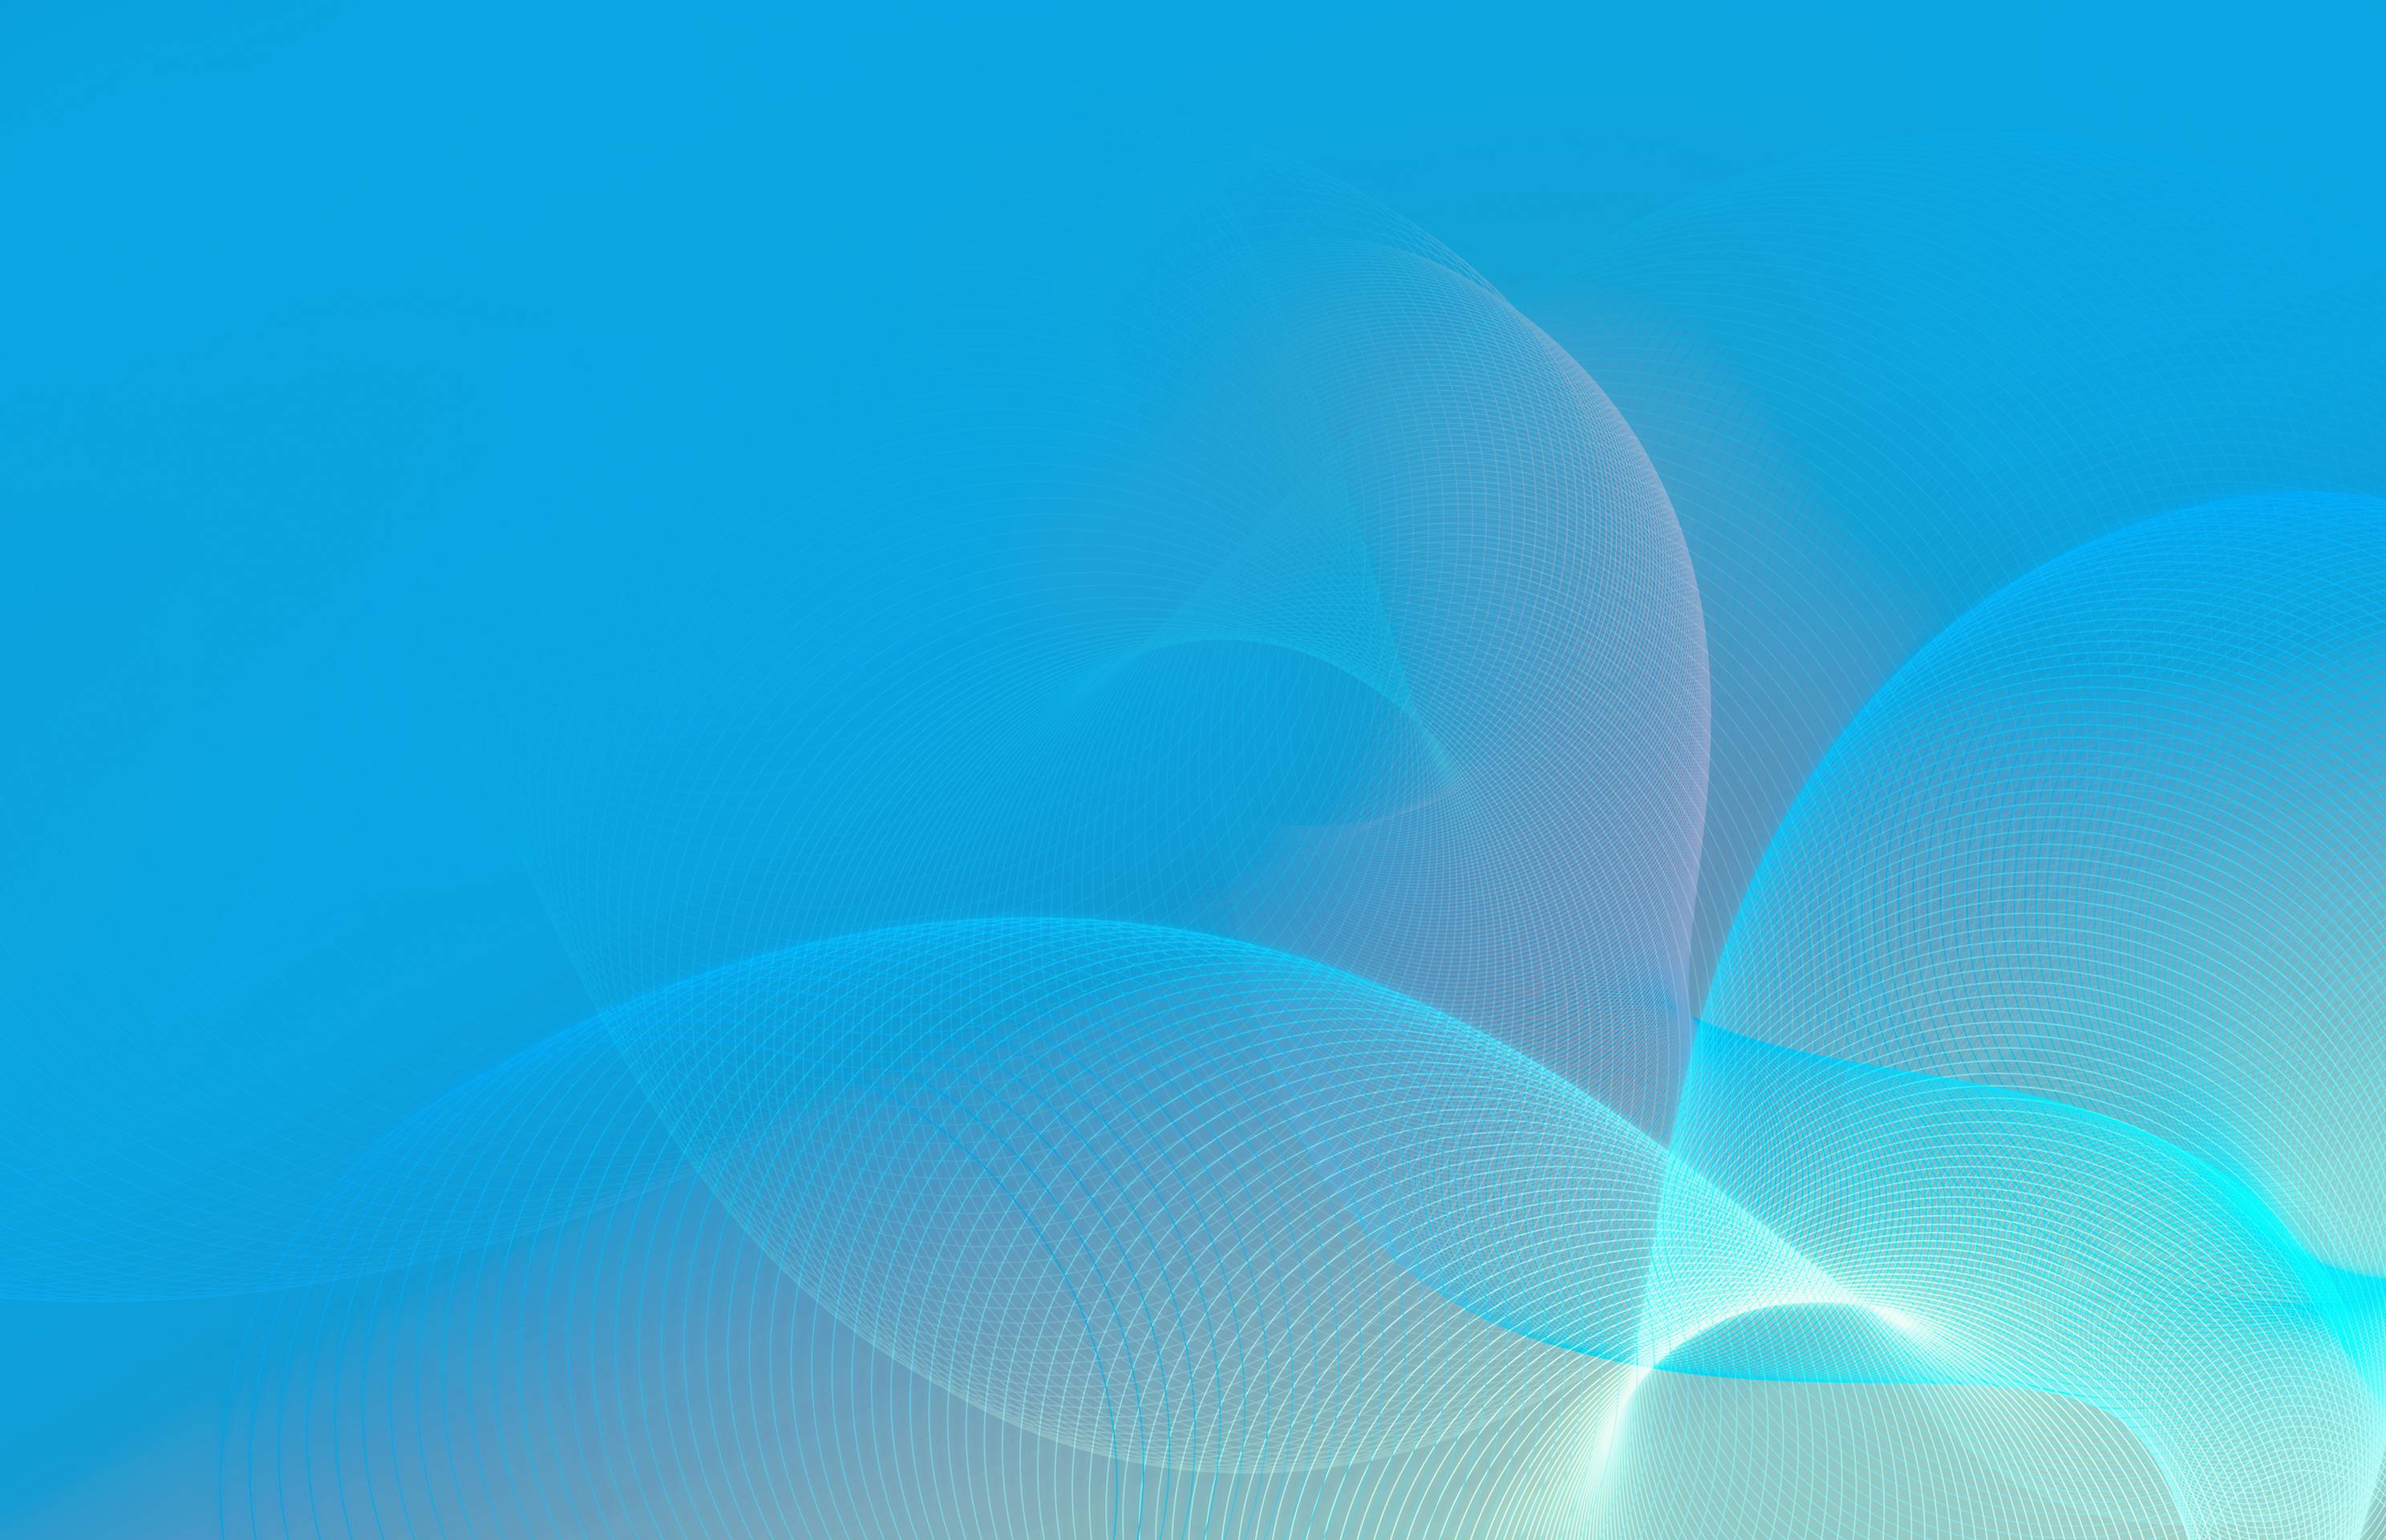 Download New Nexus 7 And Android 4.3 Wallpaper. [HD]